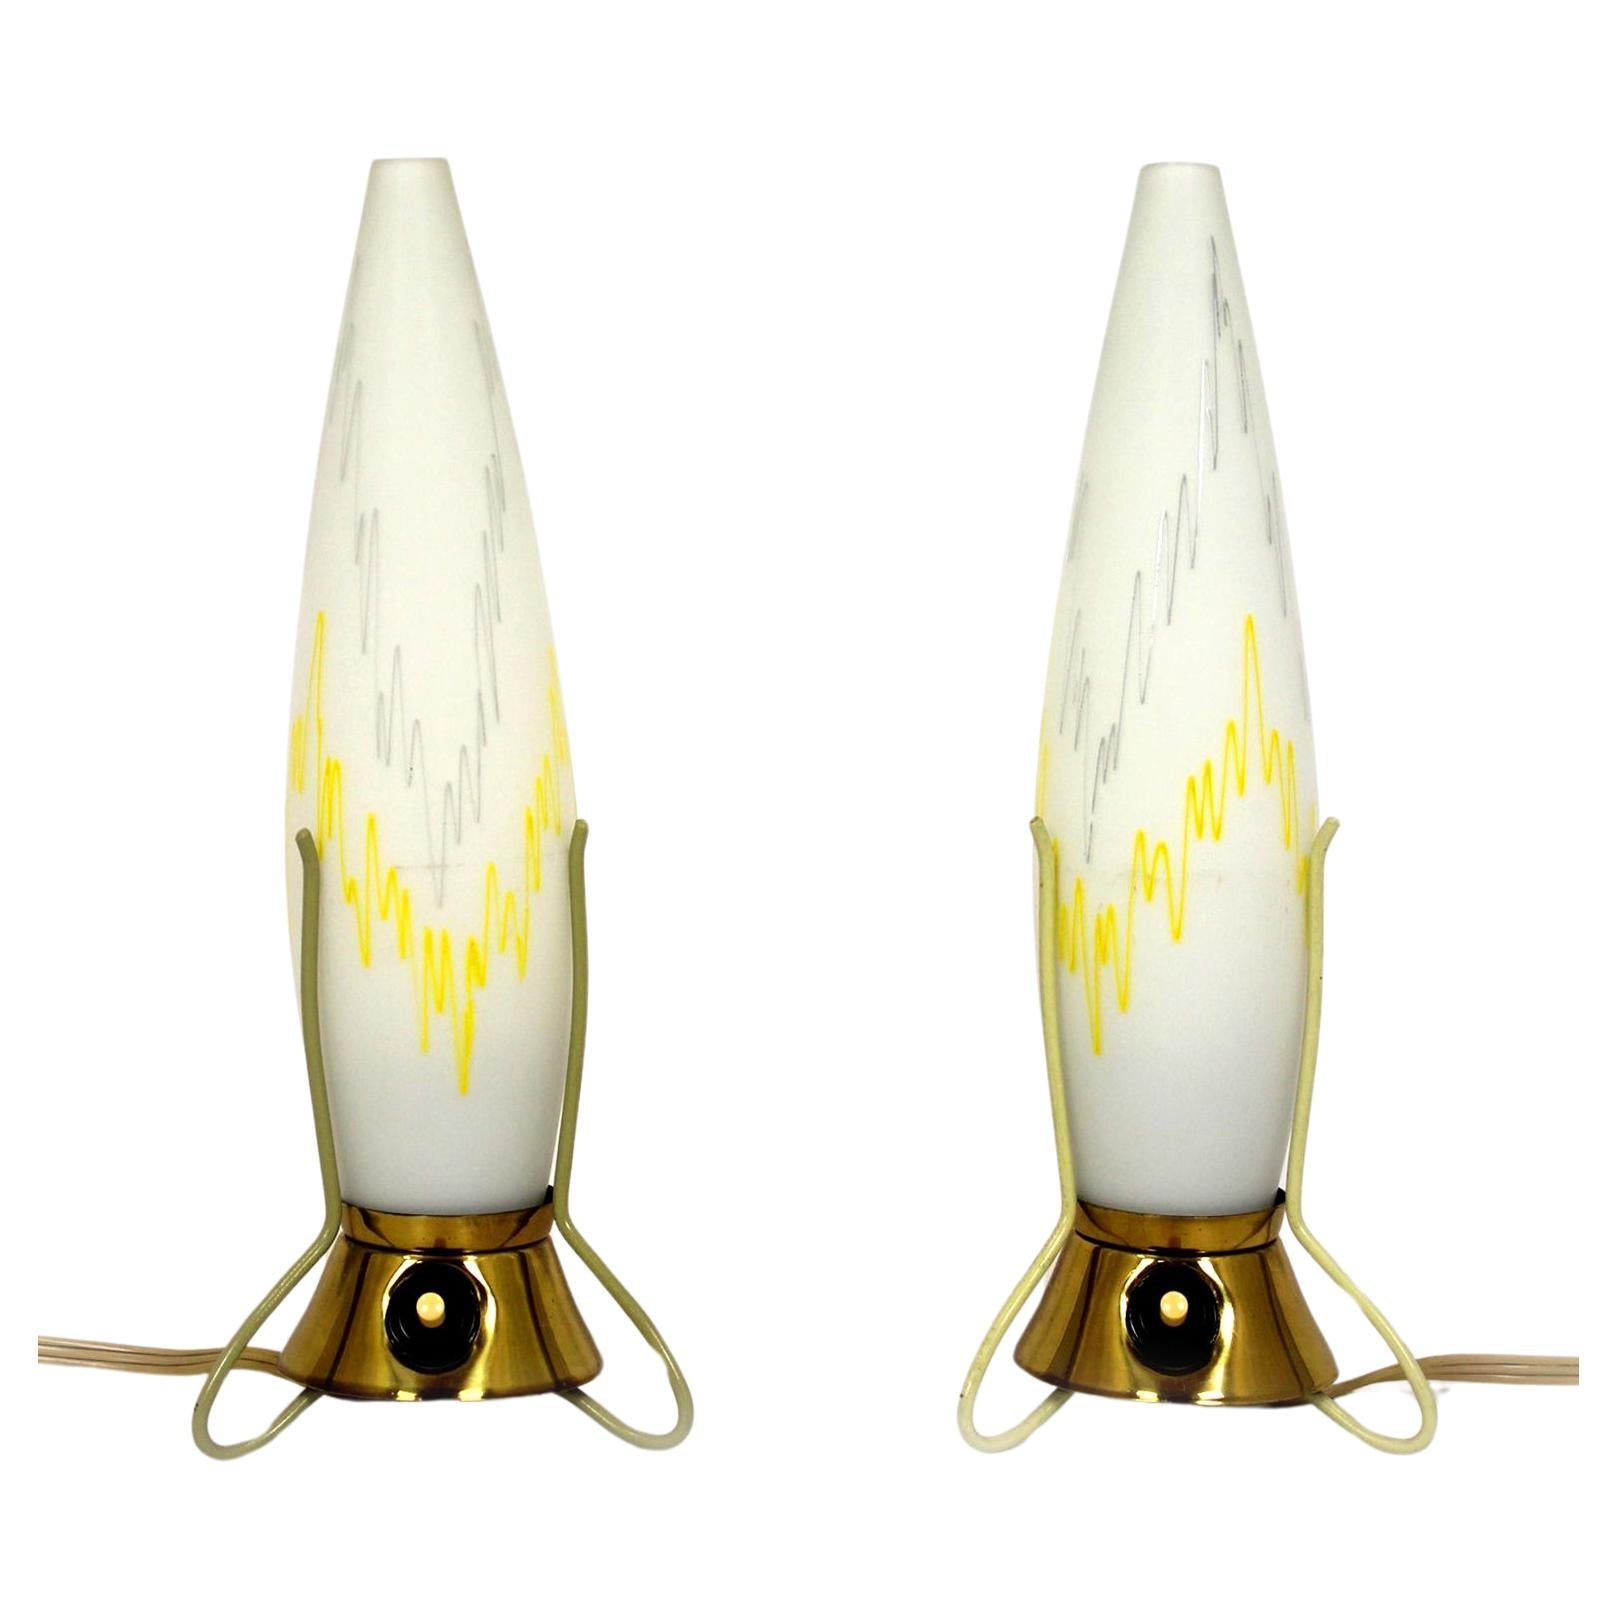 Space Age Rocket Table Lamps by Zukov, 1960s, Set of 2